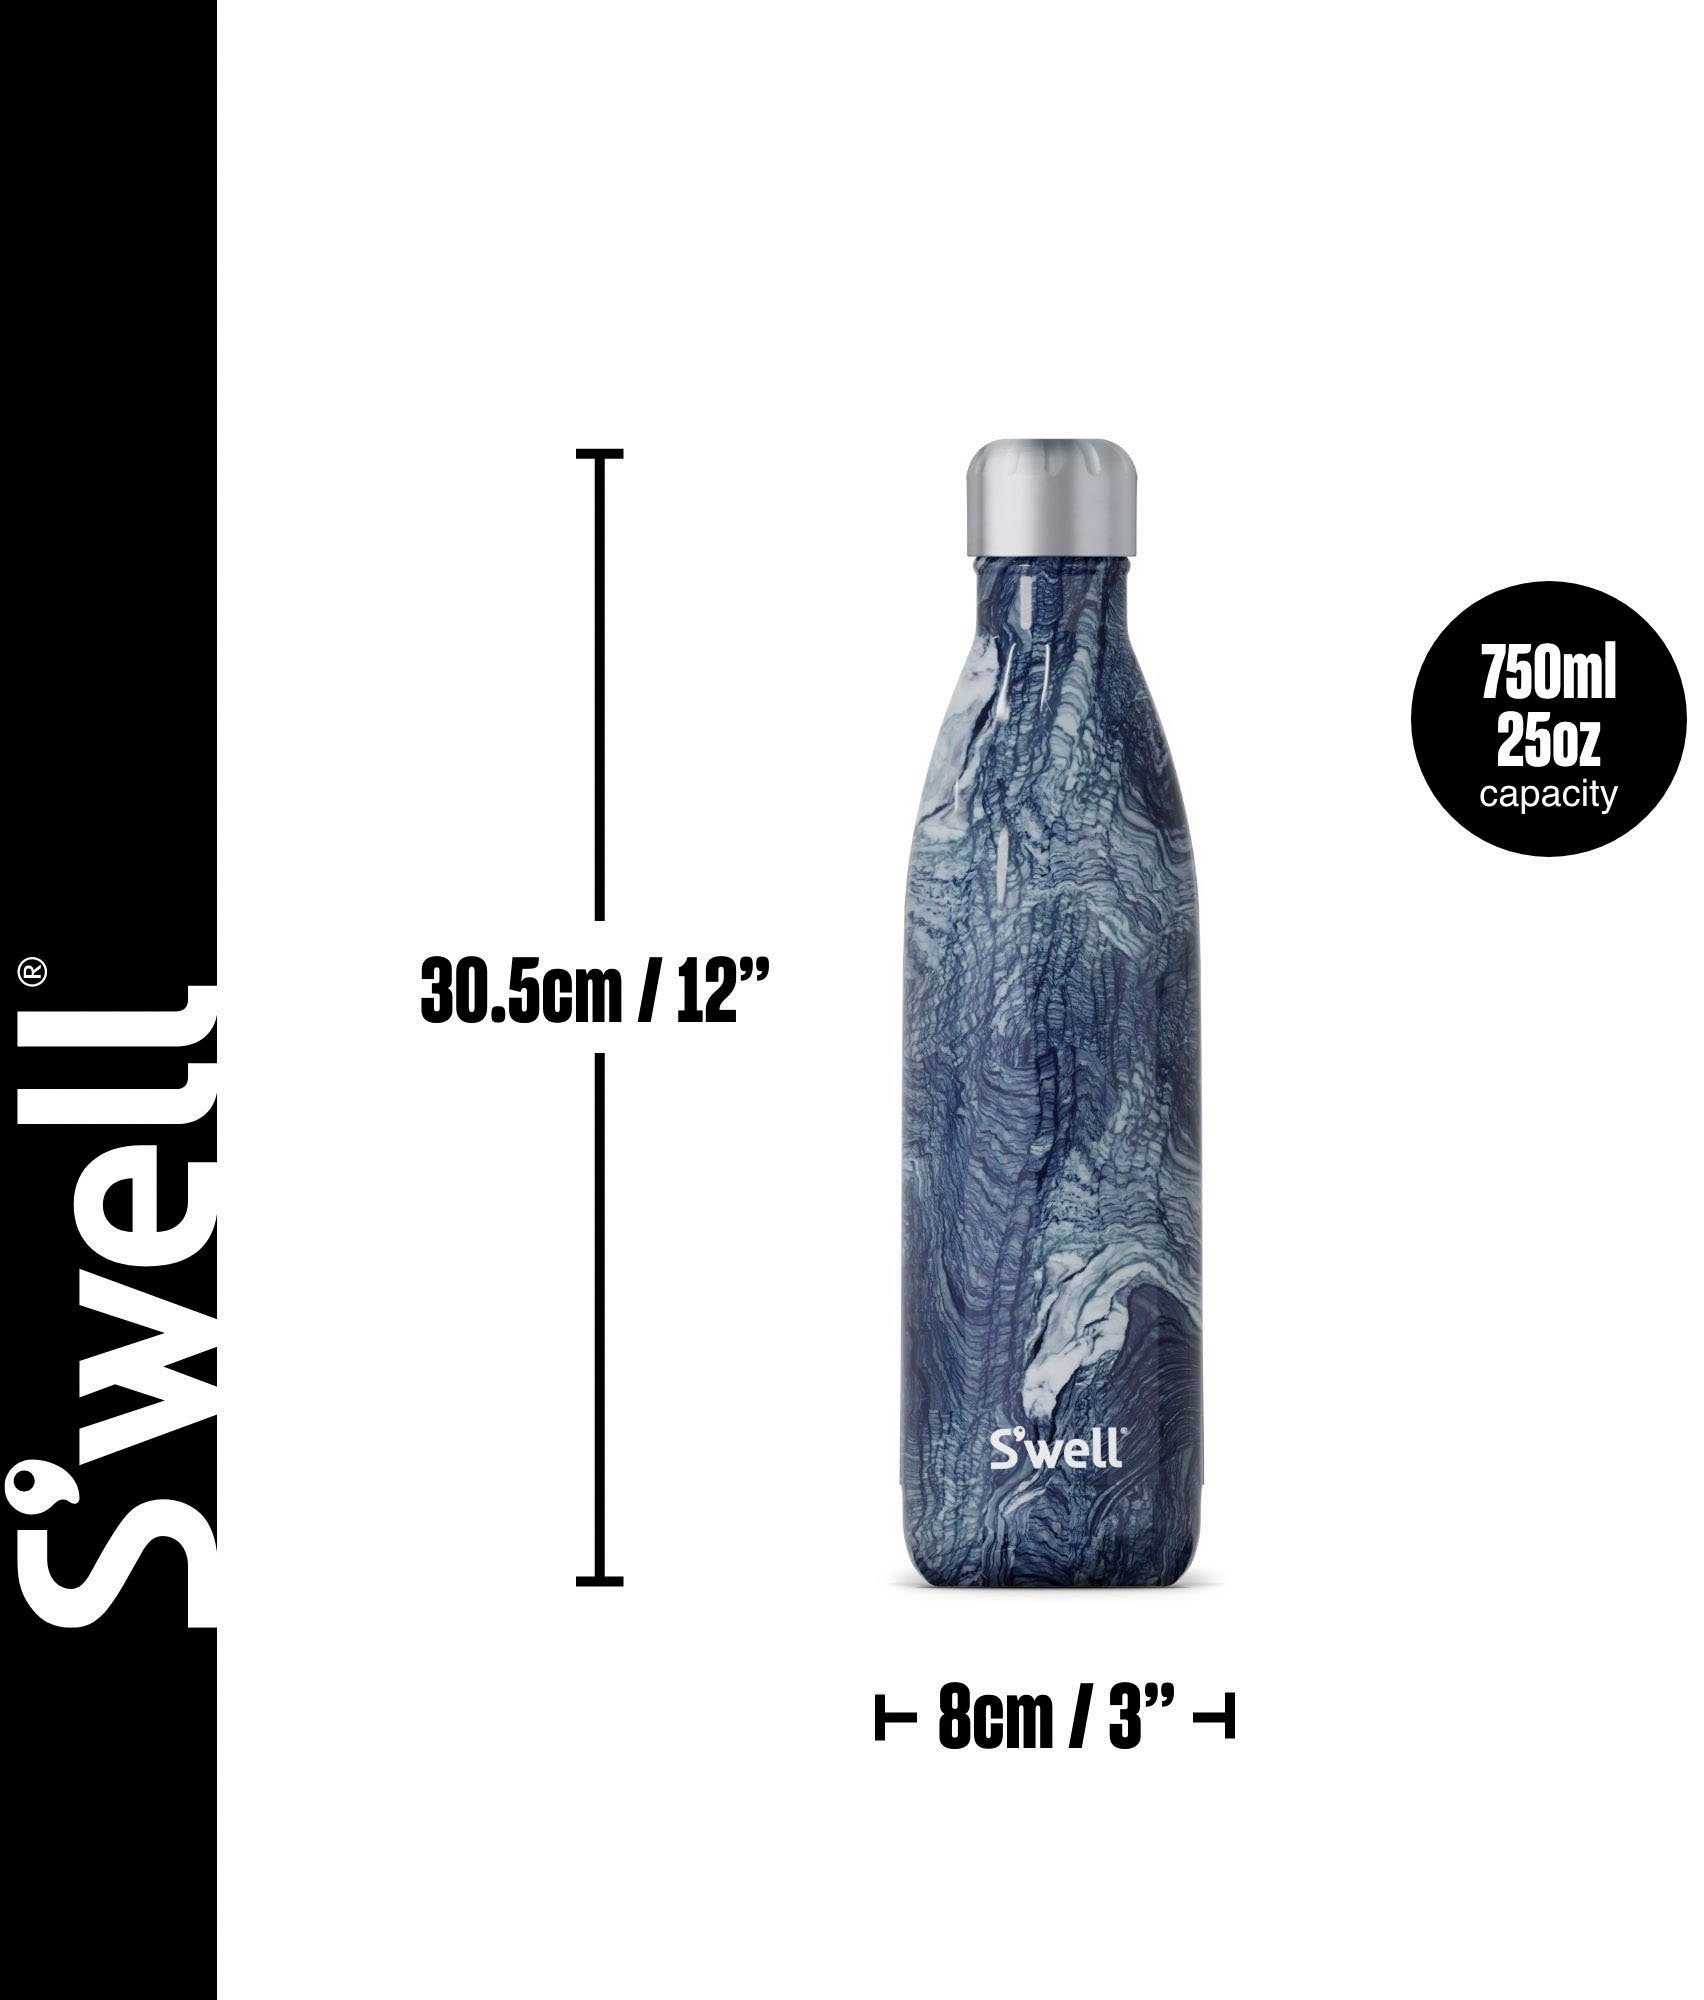 Azurit-Marmor Isolierflasche S'well S'well ml 750 Topaz,